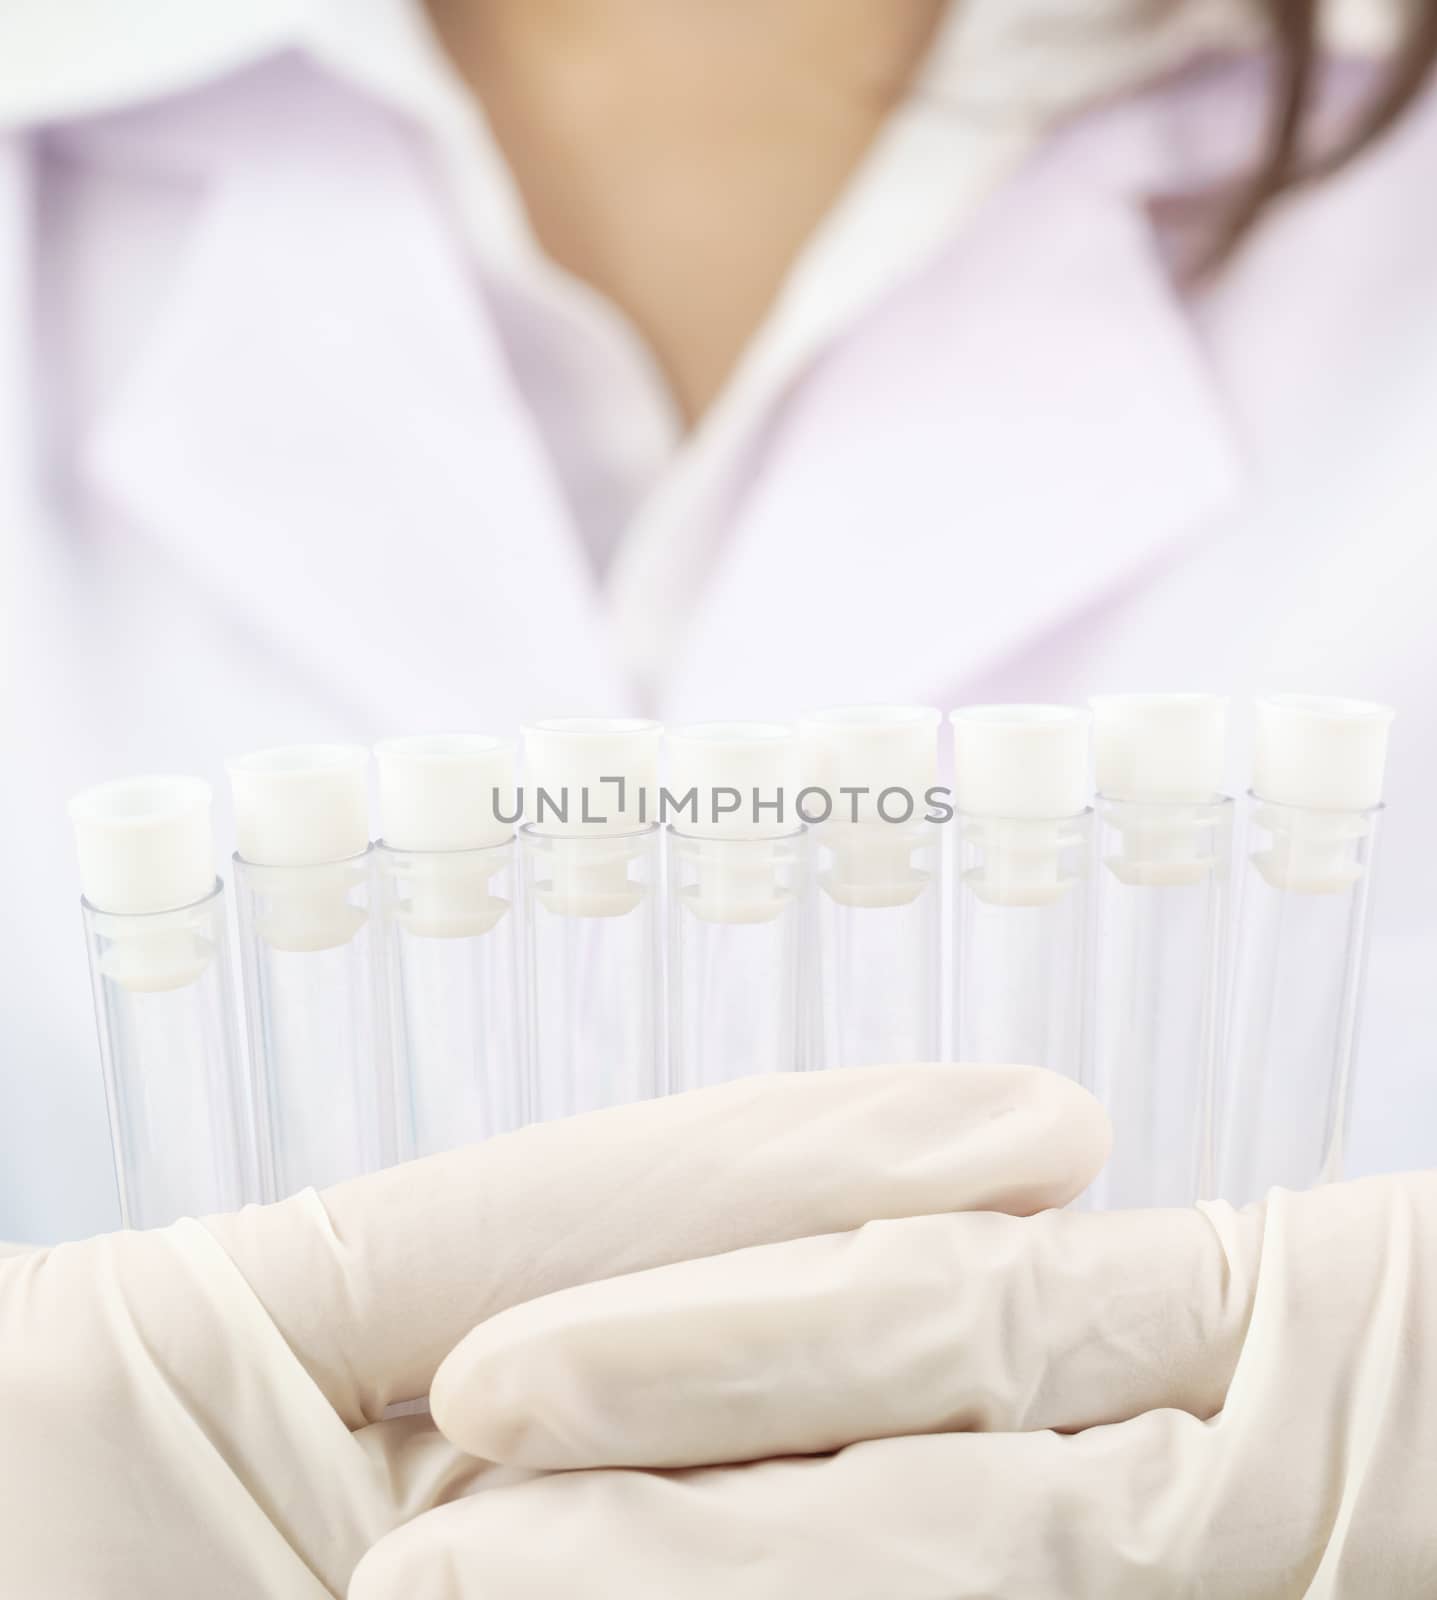 Scientist analyzing holding test tube in laboratory by stoonn